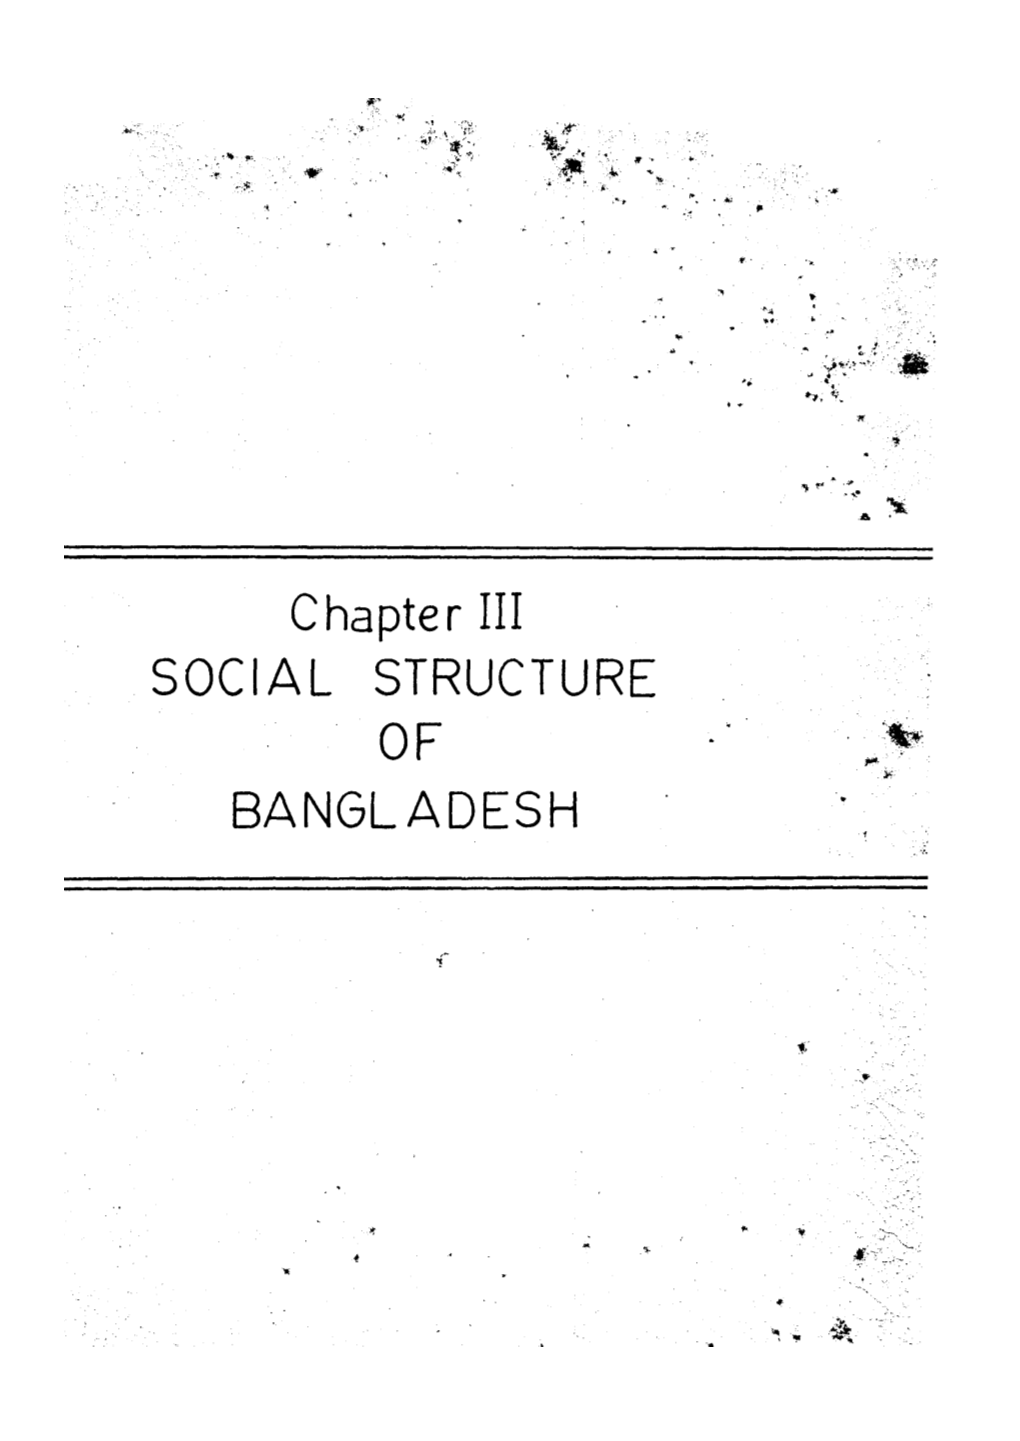 Chapter III SOCIAL STRUCTURE of BANGLADESH